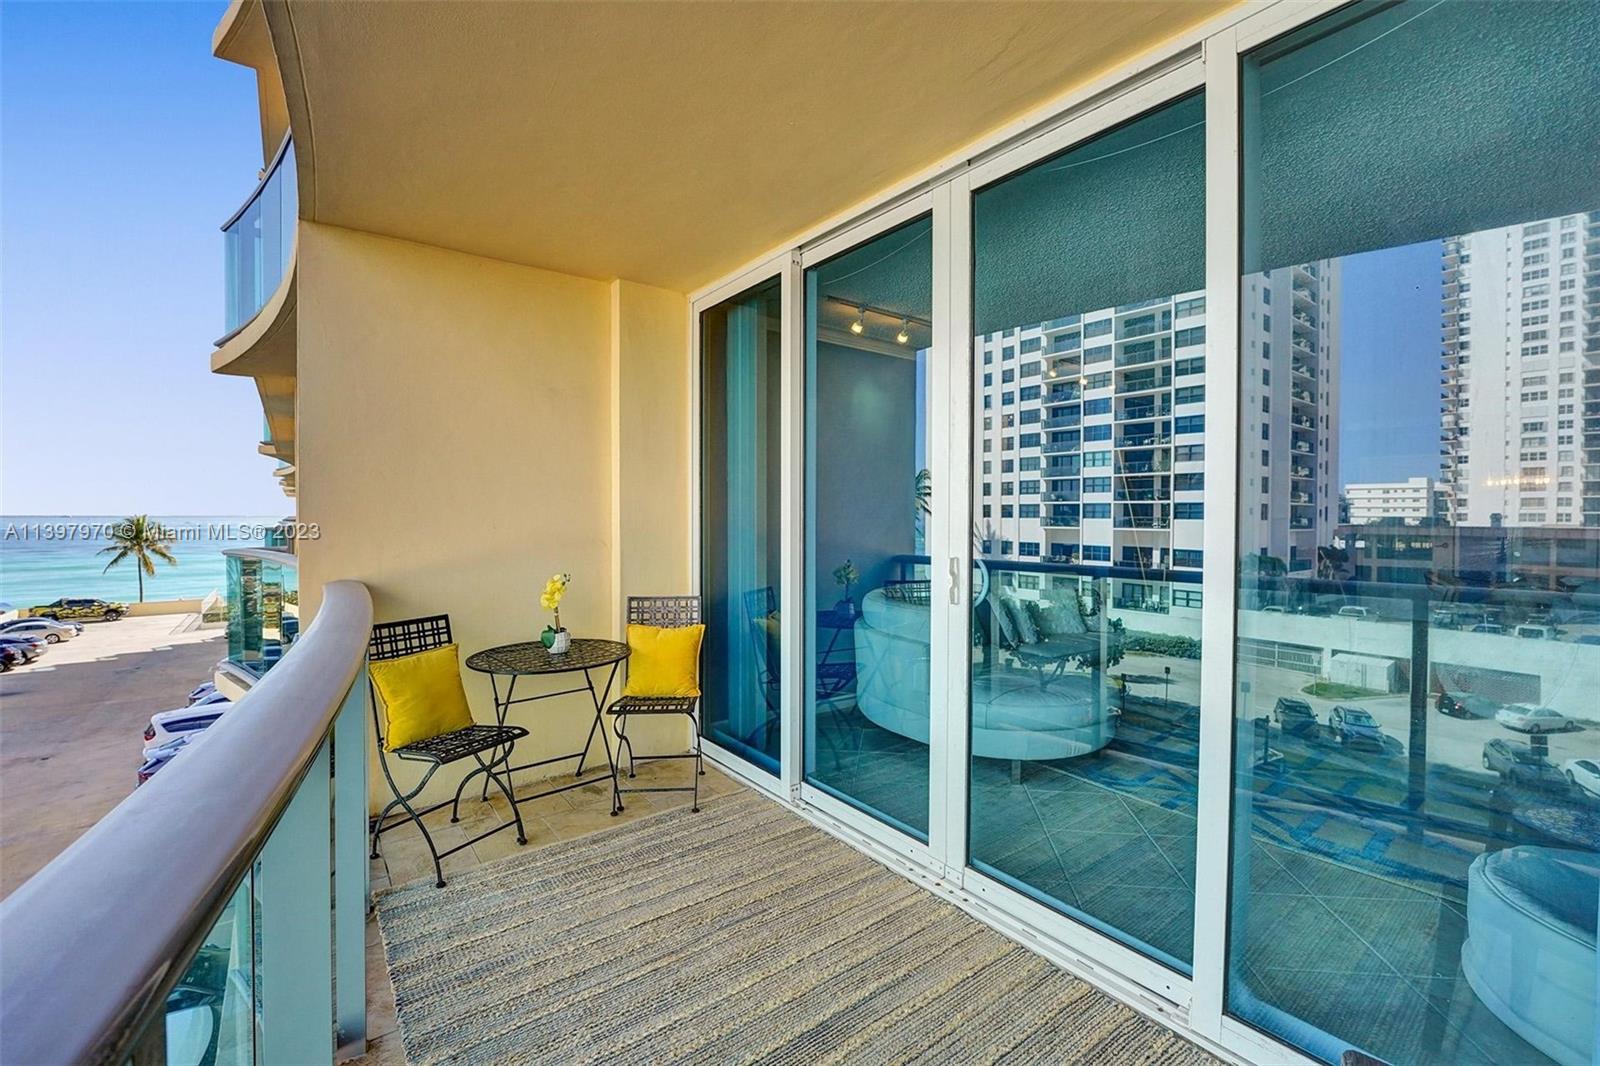 2501 S Ocean Dr #401 (available Now), Hollywood FL 33019